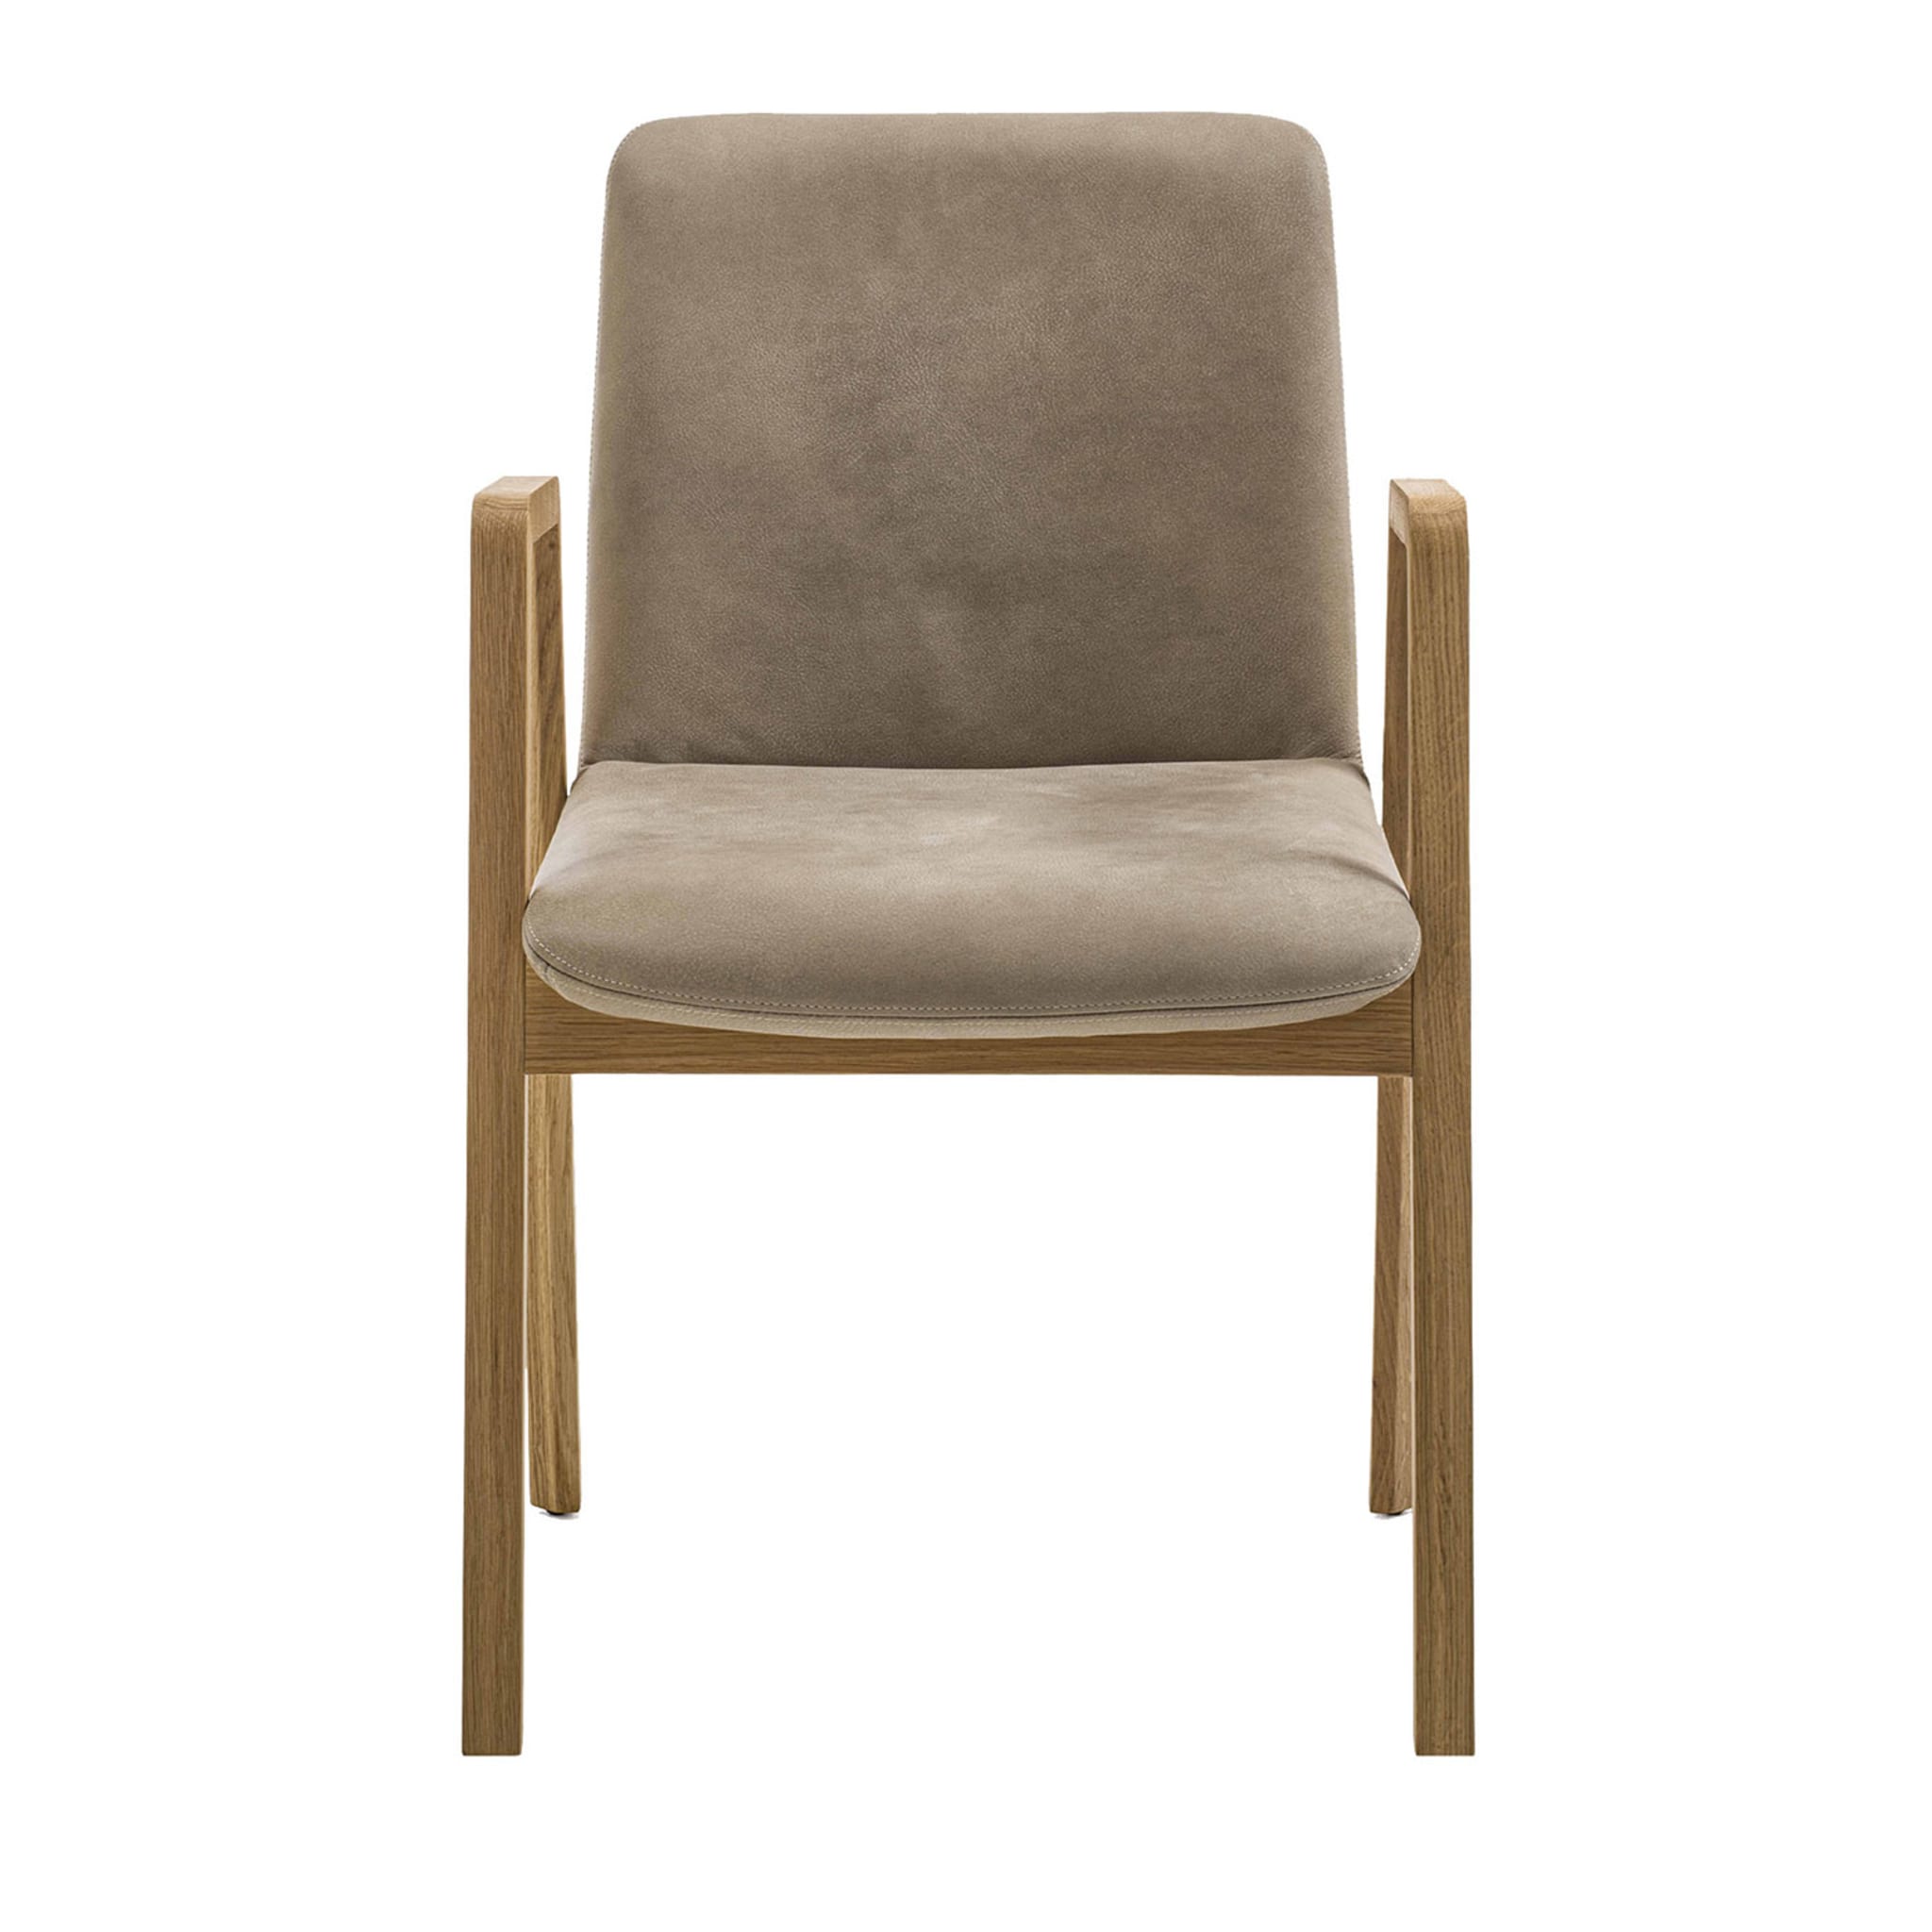 Noblé Brown Chair With Arms by Giuliano & Gabriele Cappelletti - Main view